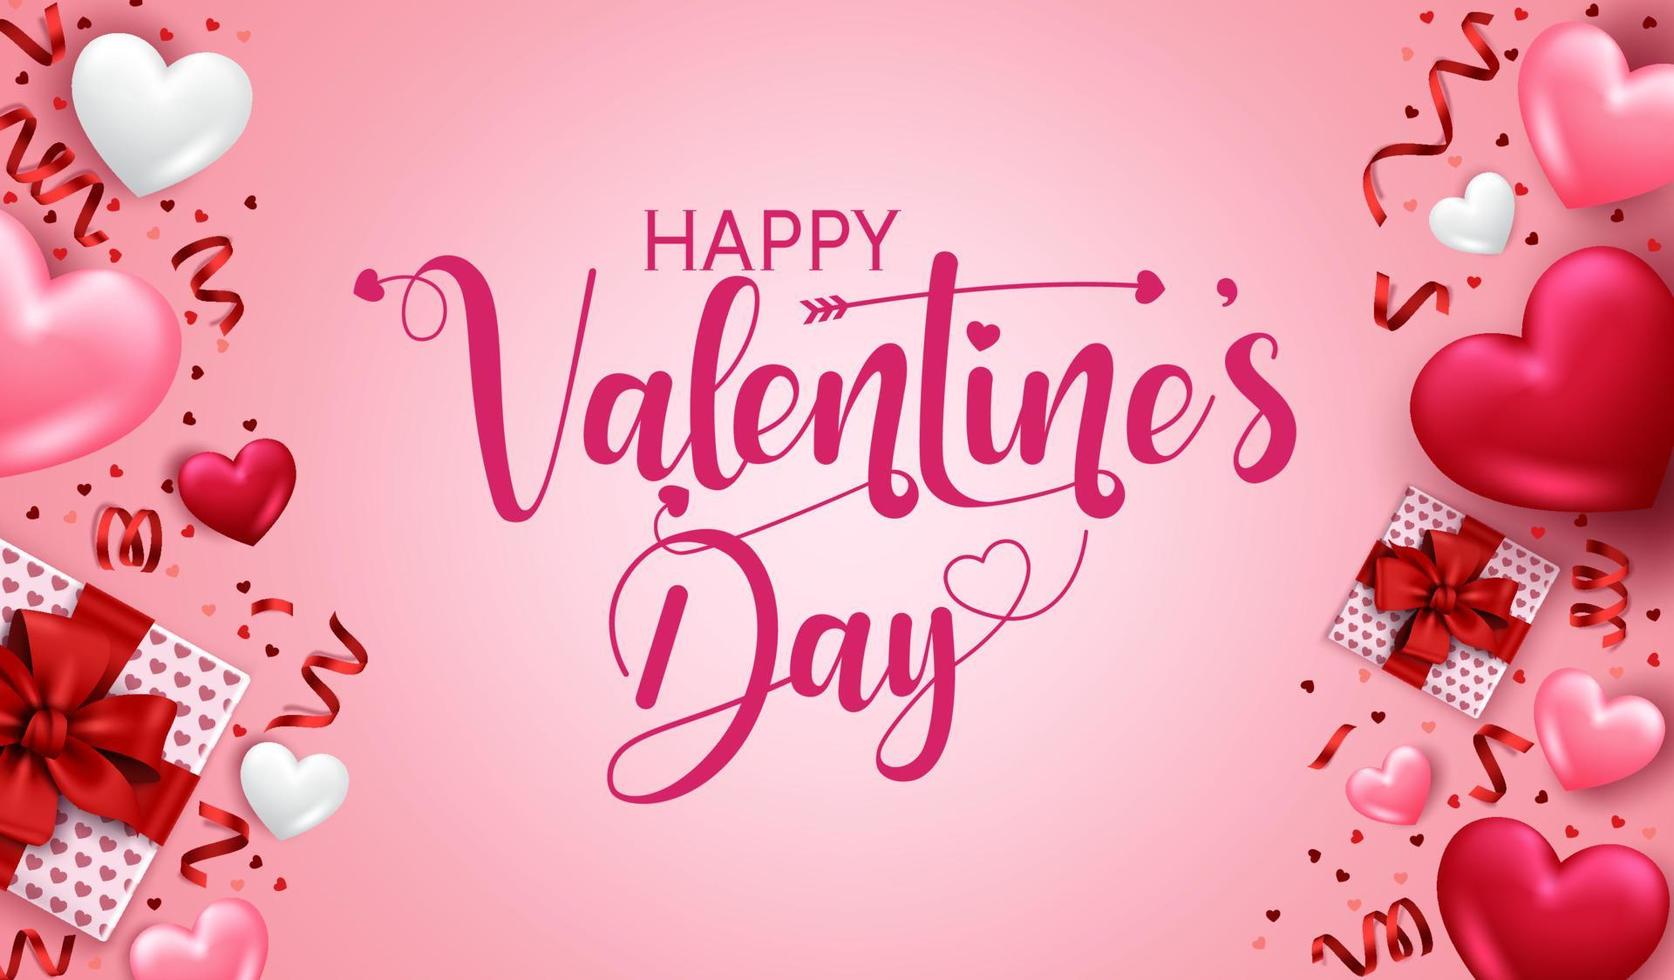 Valentines day vector banner template. Happy valentine's day in empty space for messages with valentine's decoration element for greeting card design. Vector illustration